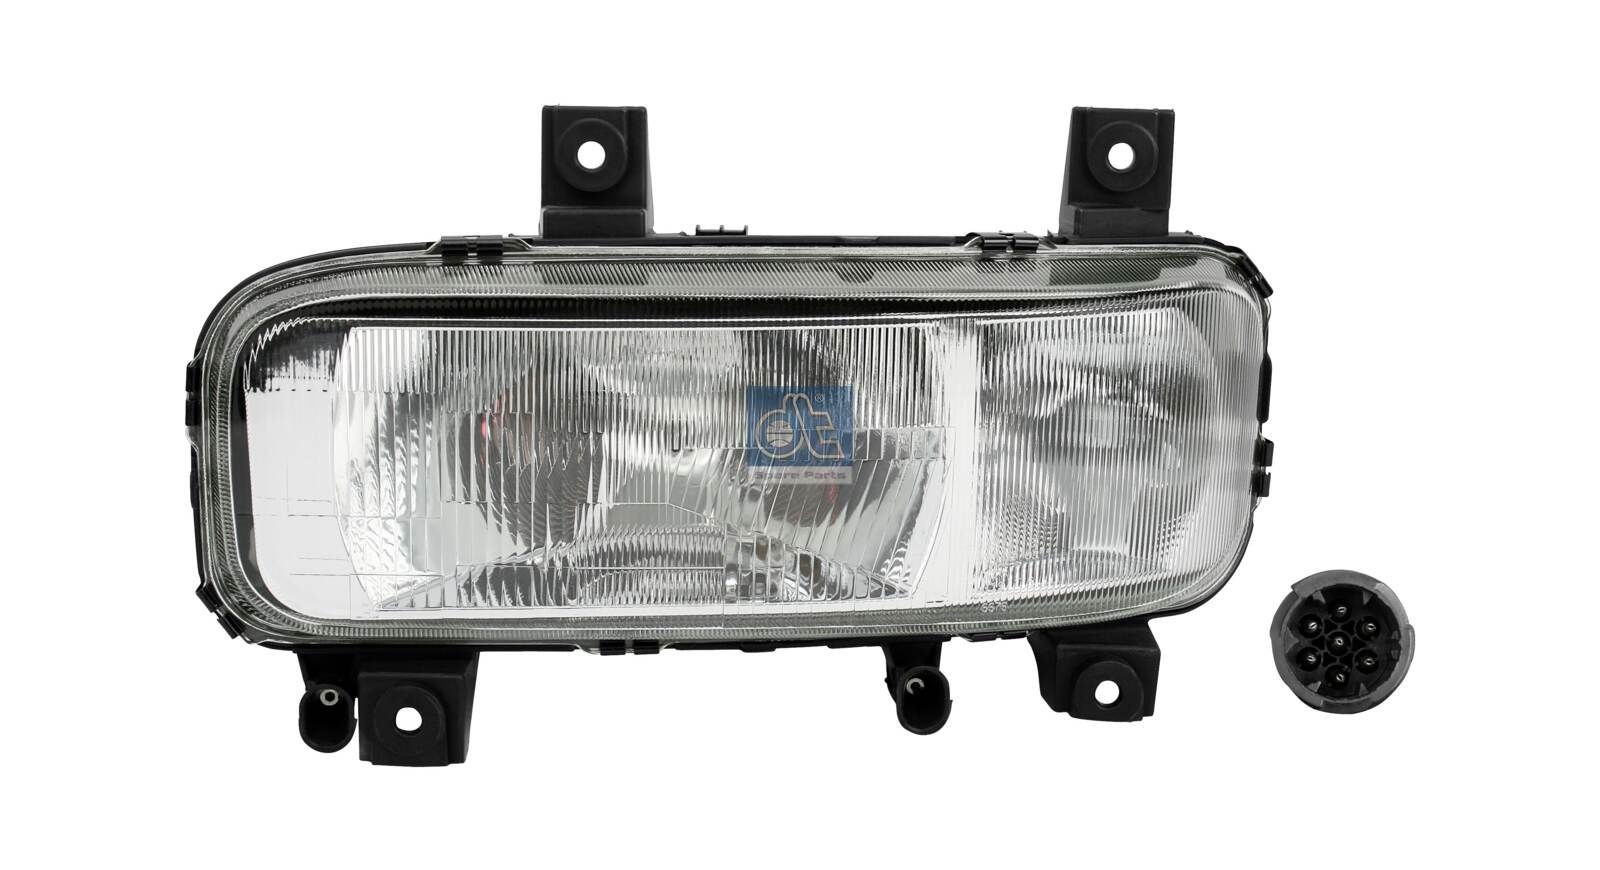 DT Spare Parts 4.62343 Headlight cheap in online store